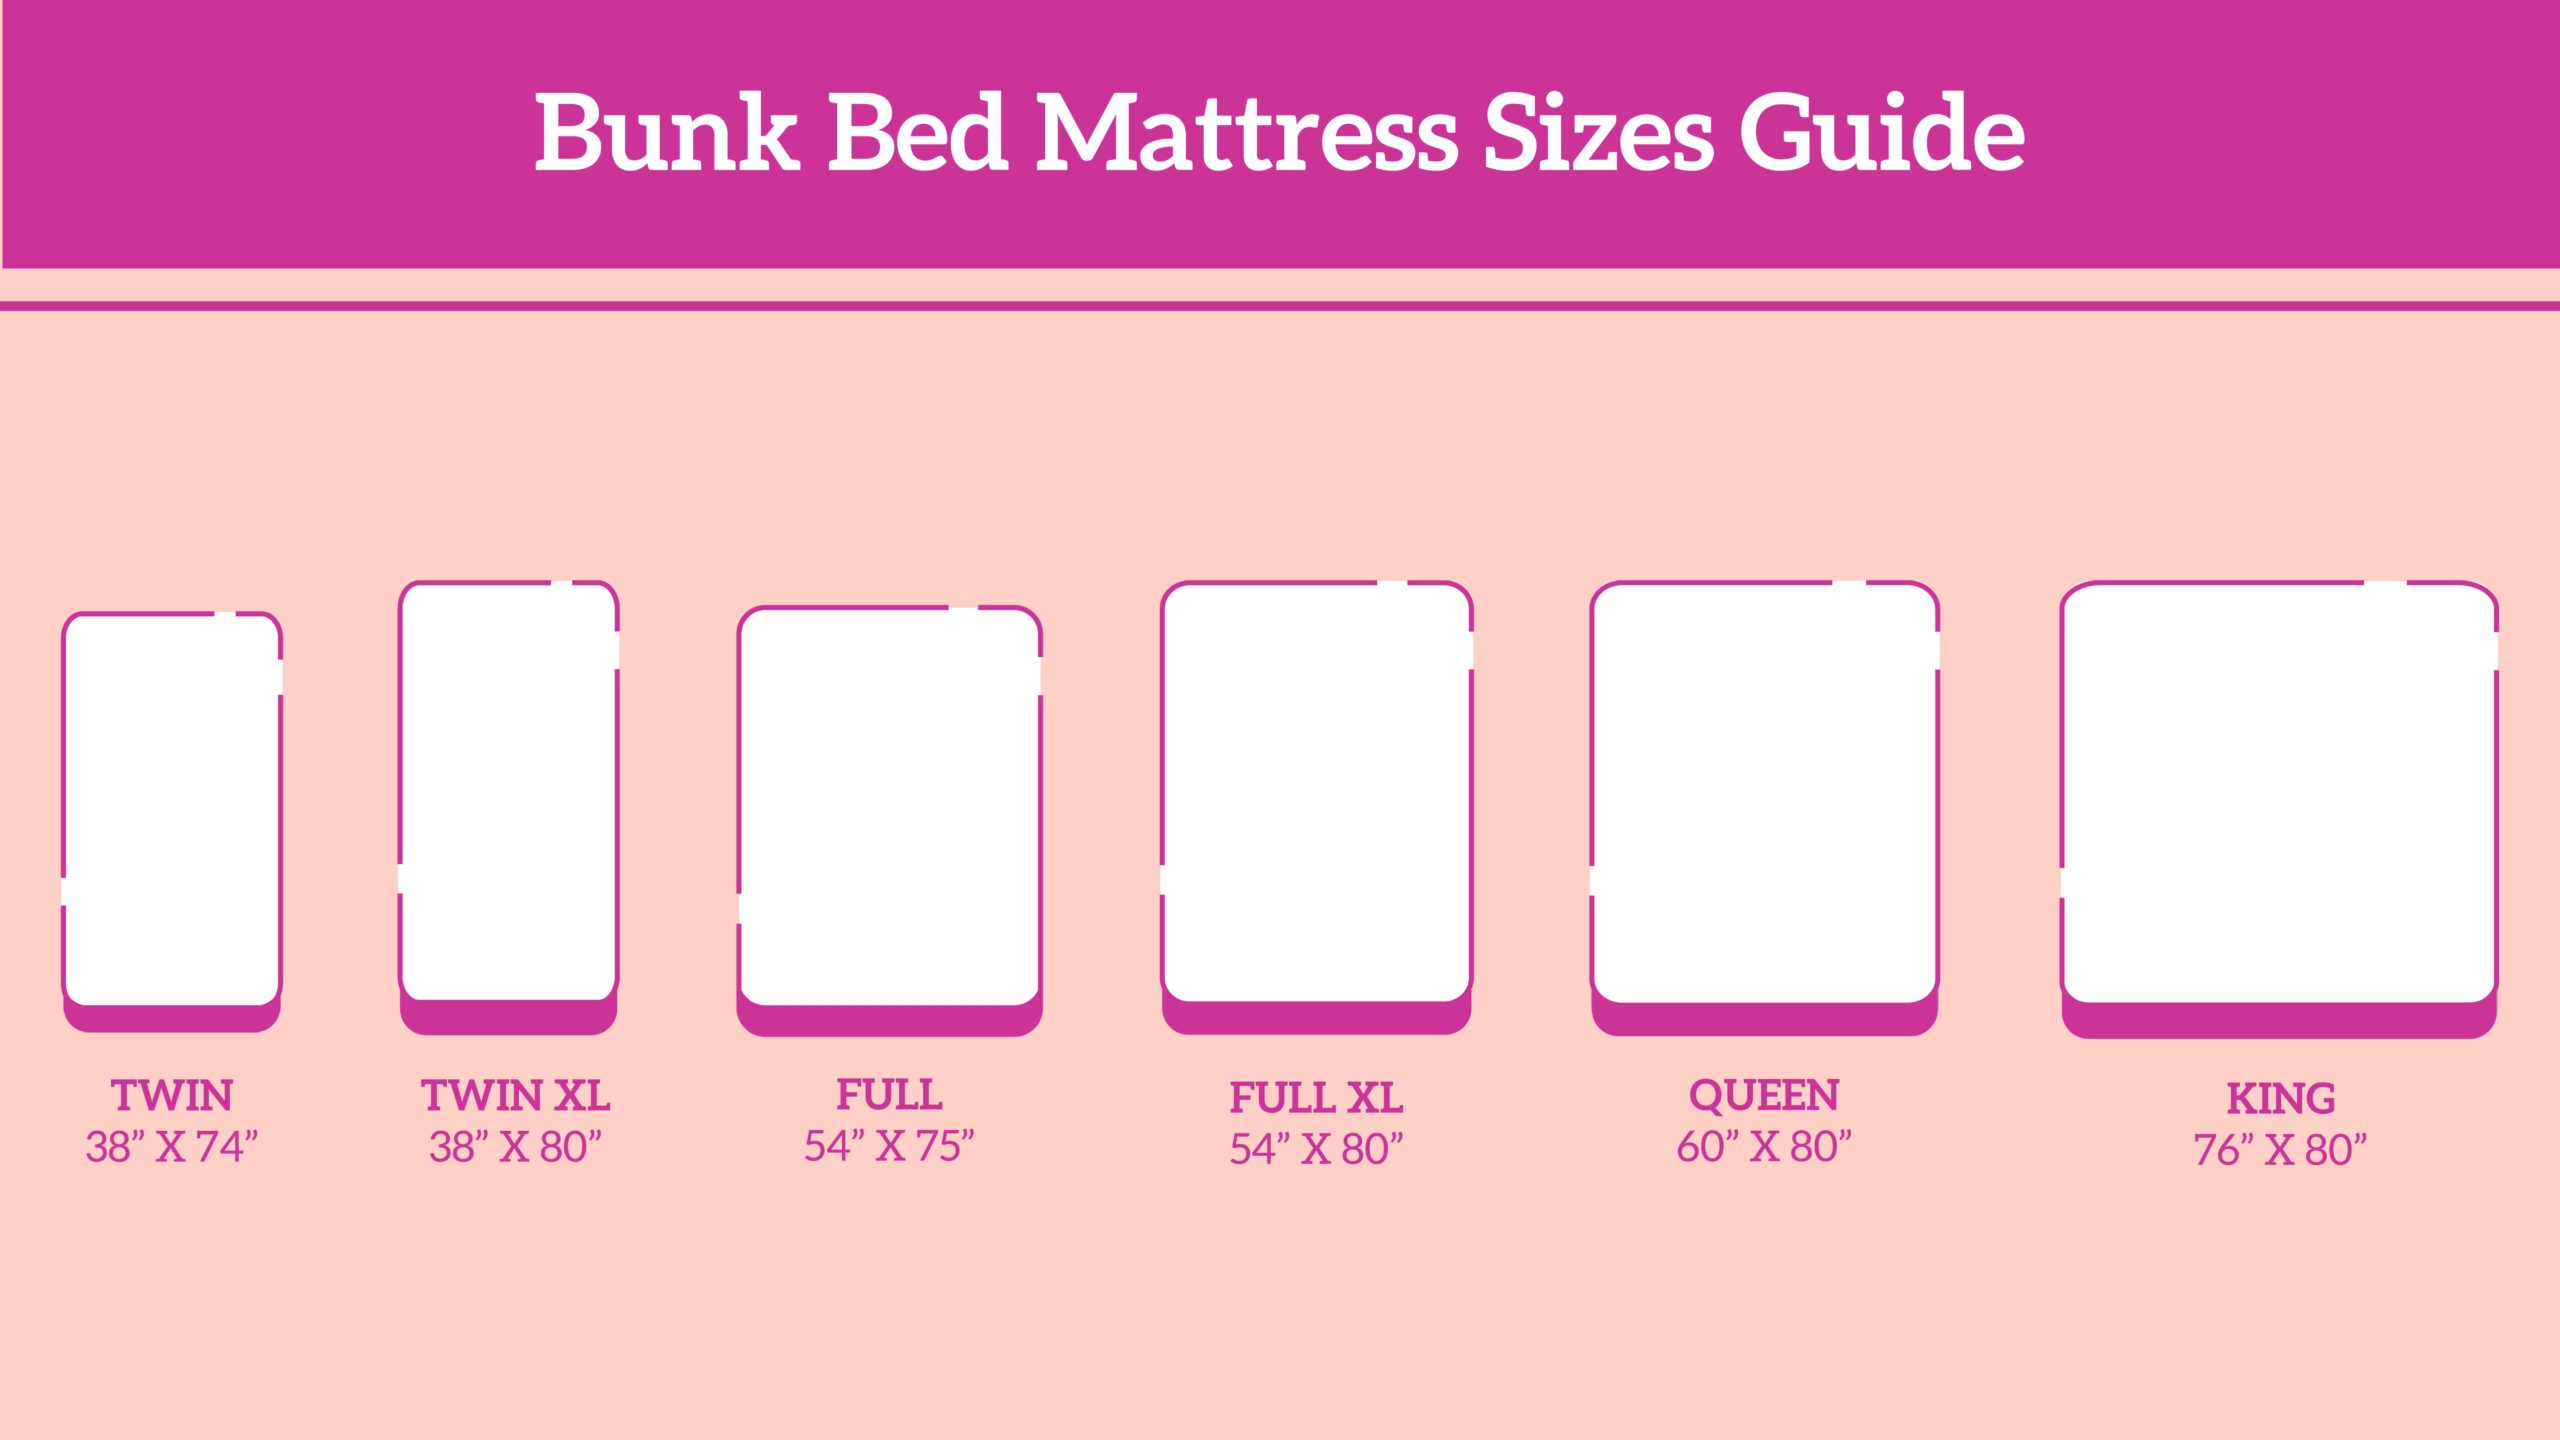 Bunk Bed Mattress Sizes Guide Eachnight, Width Of Extra Long Twin Bed